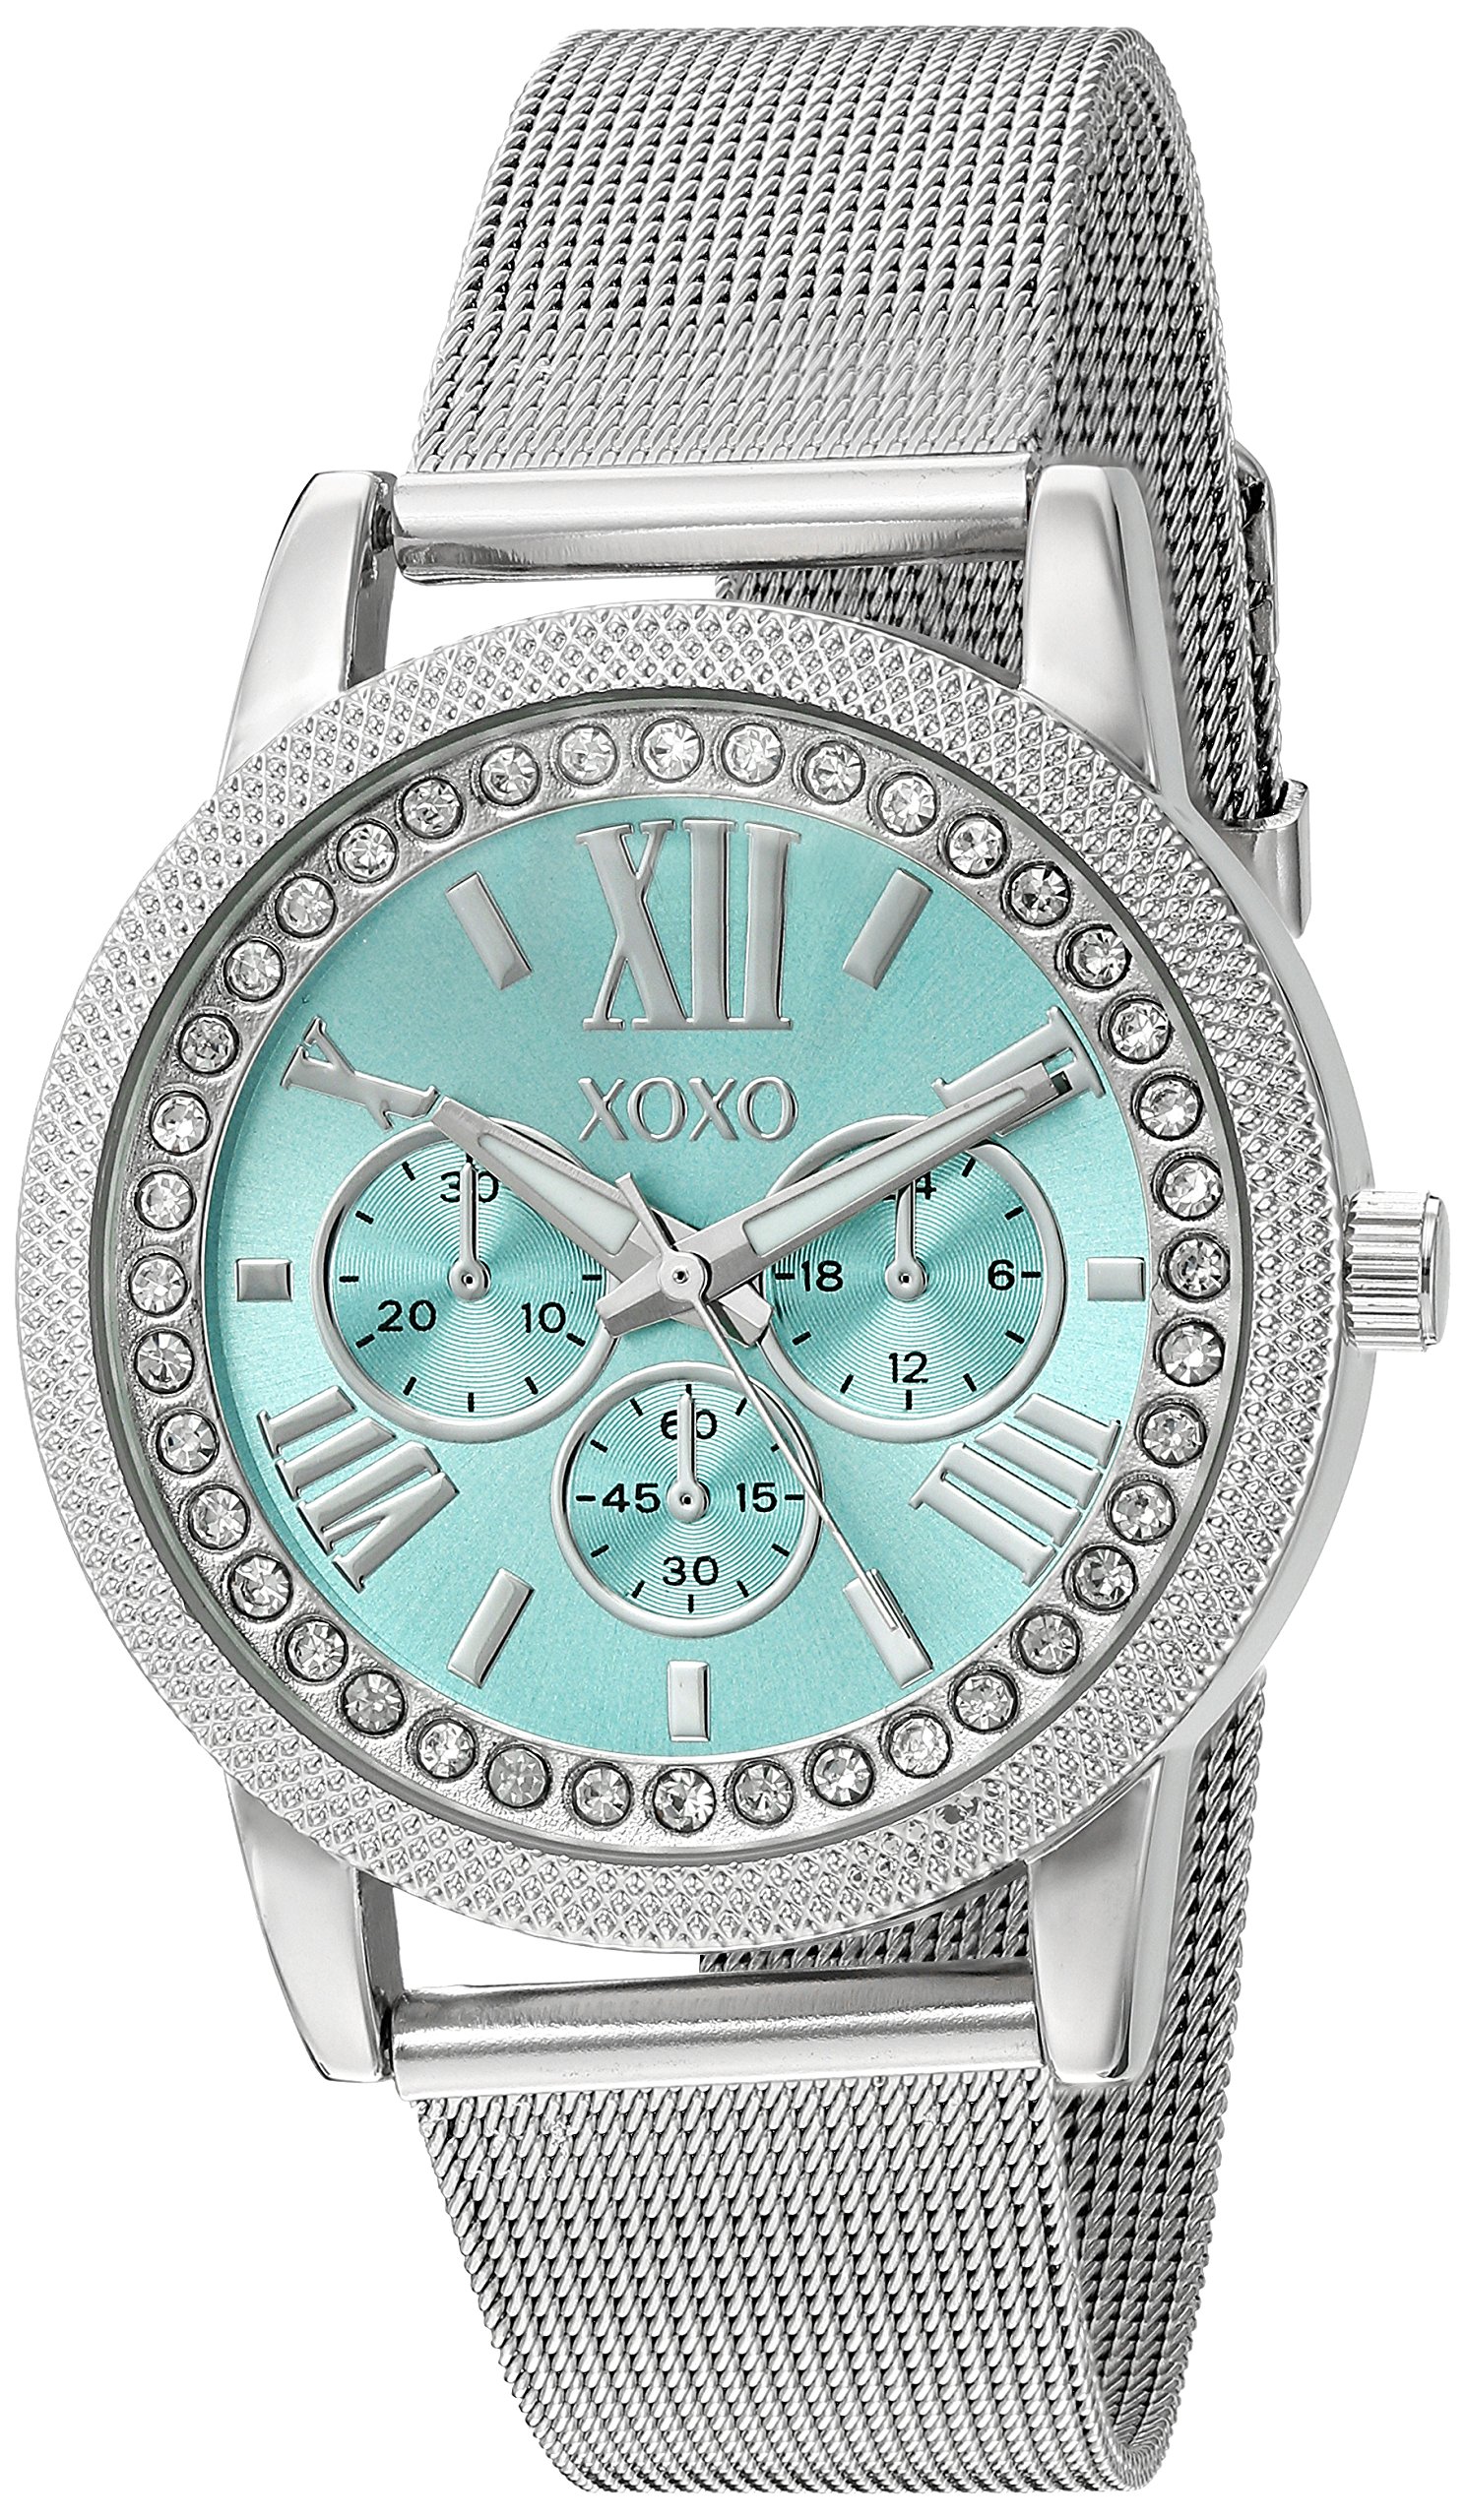 Accutime XOXO Women's Analog Watch with Silver-Tone Case, Crystal-Inset Bezel, Mesh Chain Bands - Official XOXO Woman's Silver-Tone Watch, Buckle Closure - Model: XO5899